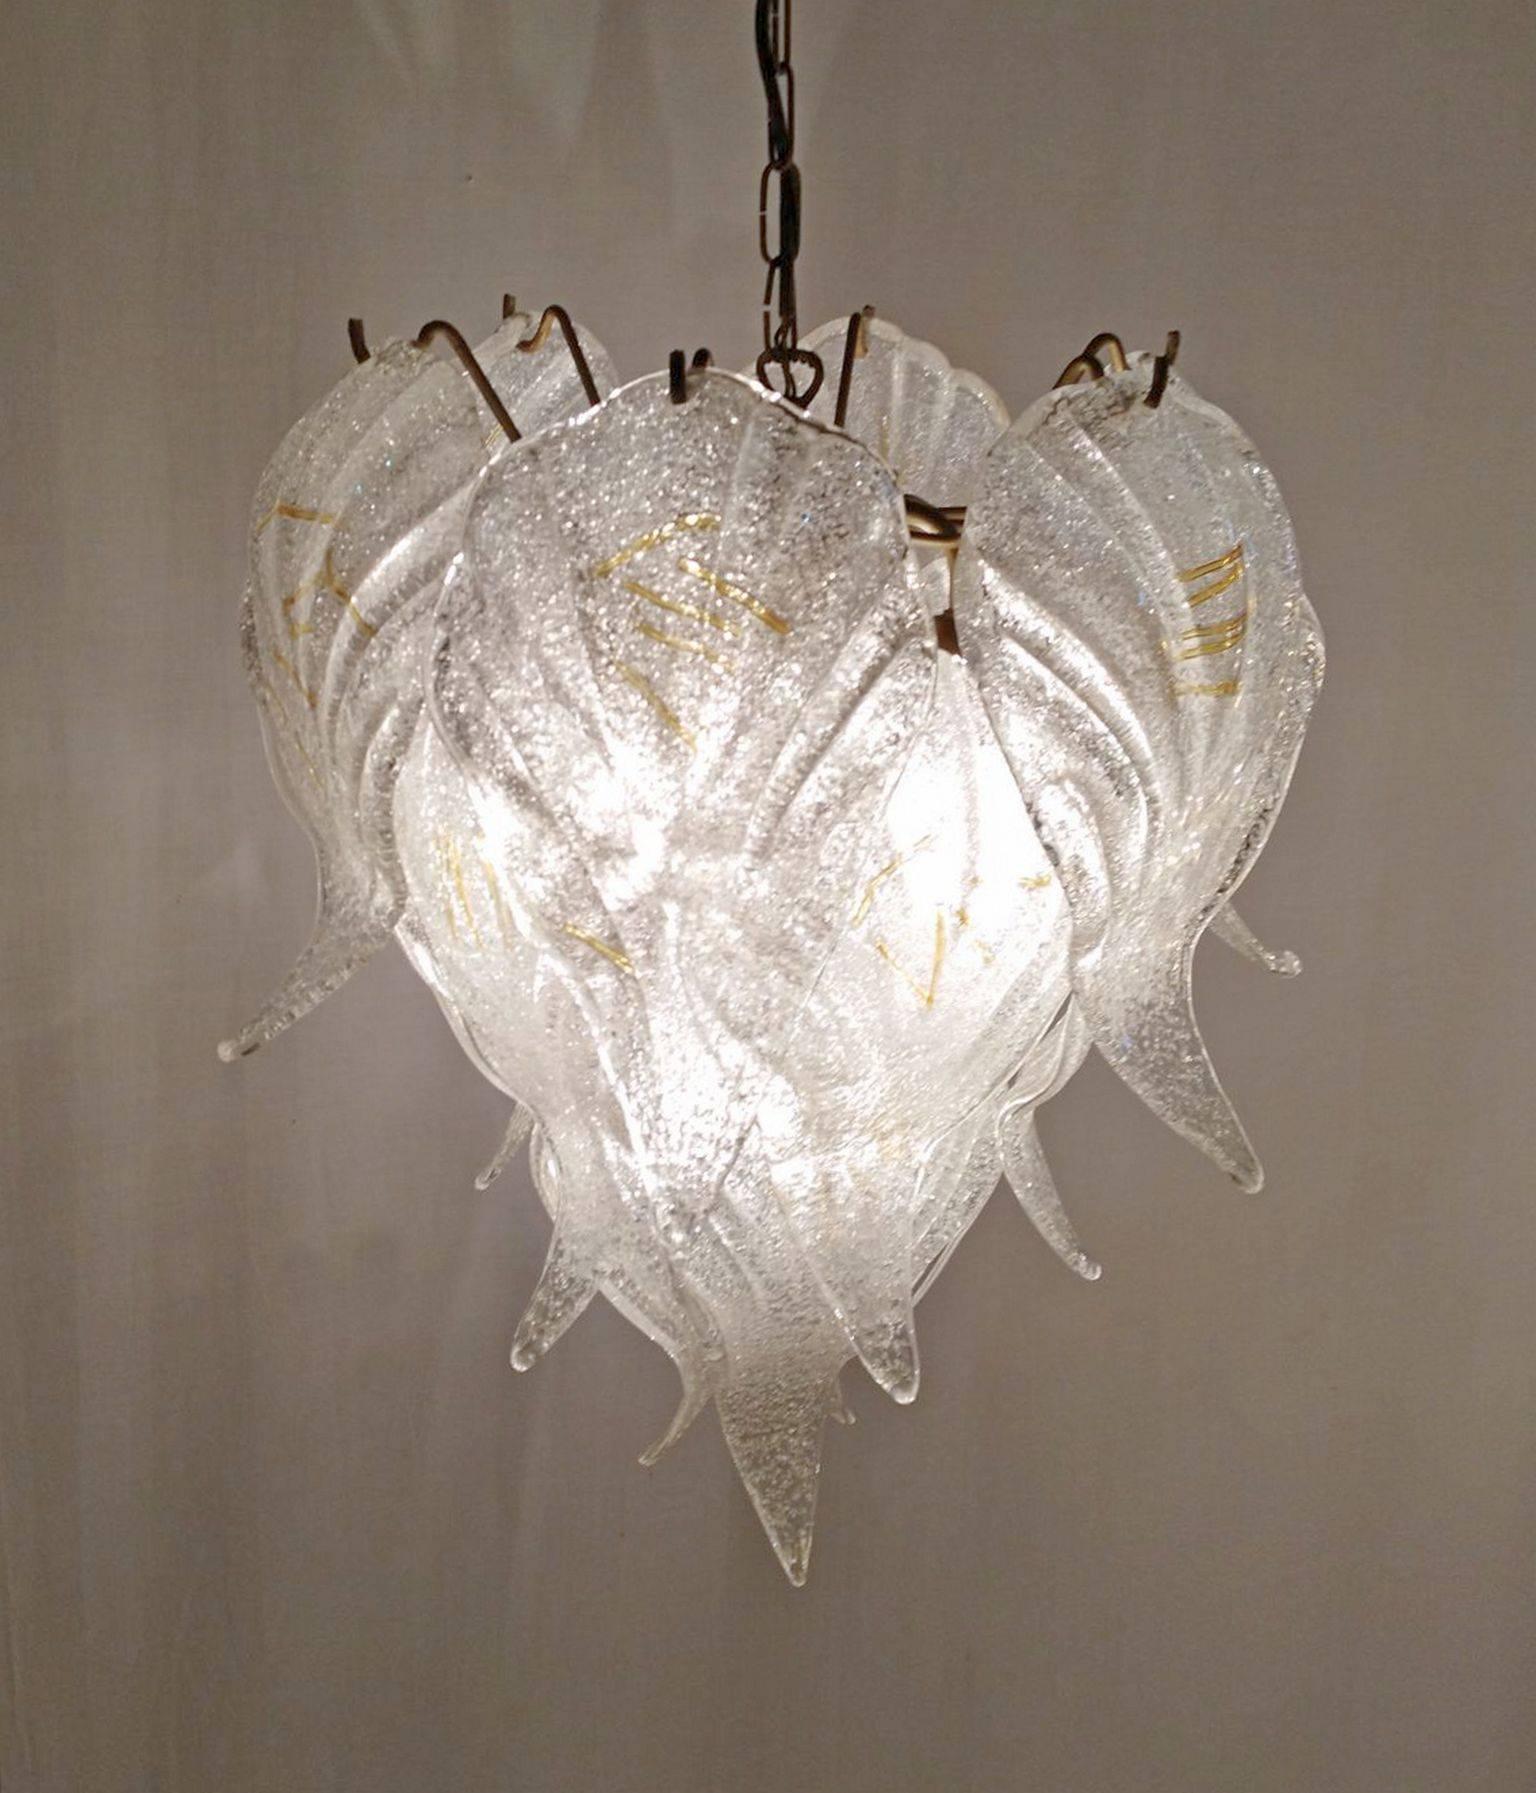 A 1960s swanky chandelier made in Murano, Italy by Mazzega. Features 15 large frosted textured glass pieces shaped like leafs hanging from a gold colored structure. The lamp without chain measures 60 cm. And complete it is 110cm. Can be delivered